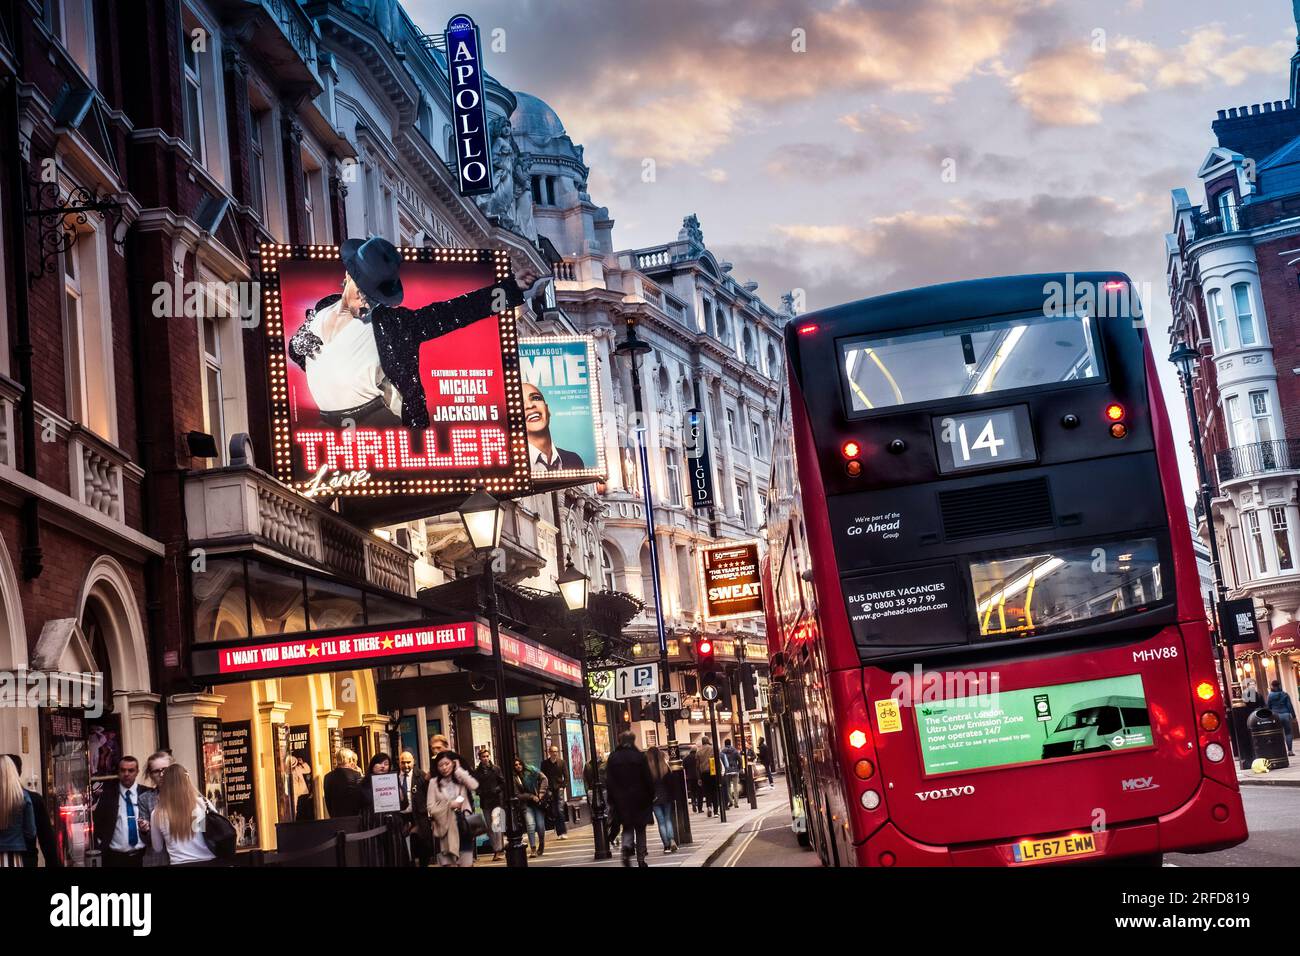 LONDON ULEZ  2019 RETRO ADVERTISEMENT RED BUS SHAFTESBURY AVENUE NIGHT LONDON TRAFFIC SUNSET  Theatreland West End Apollo & The Gielgud theatres busy heavy pollution diesel fumes Shaftesbury Avenue at dusk West End London UK Stock Photo